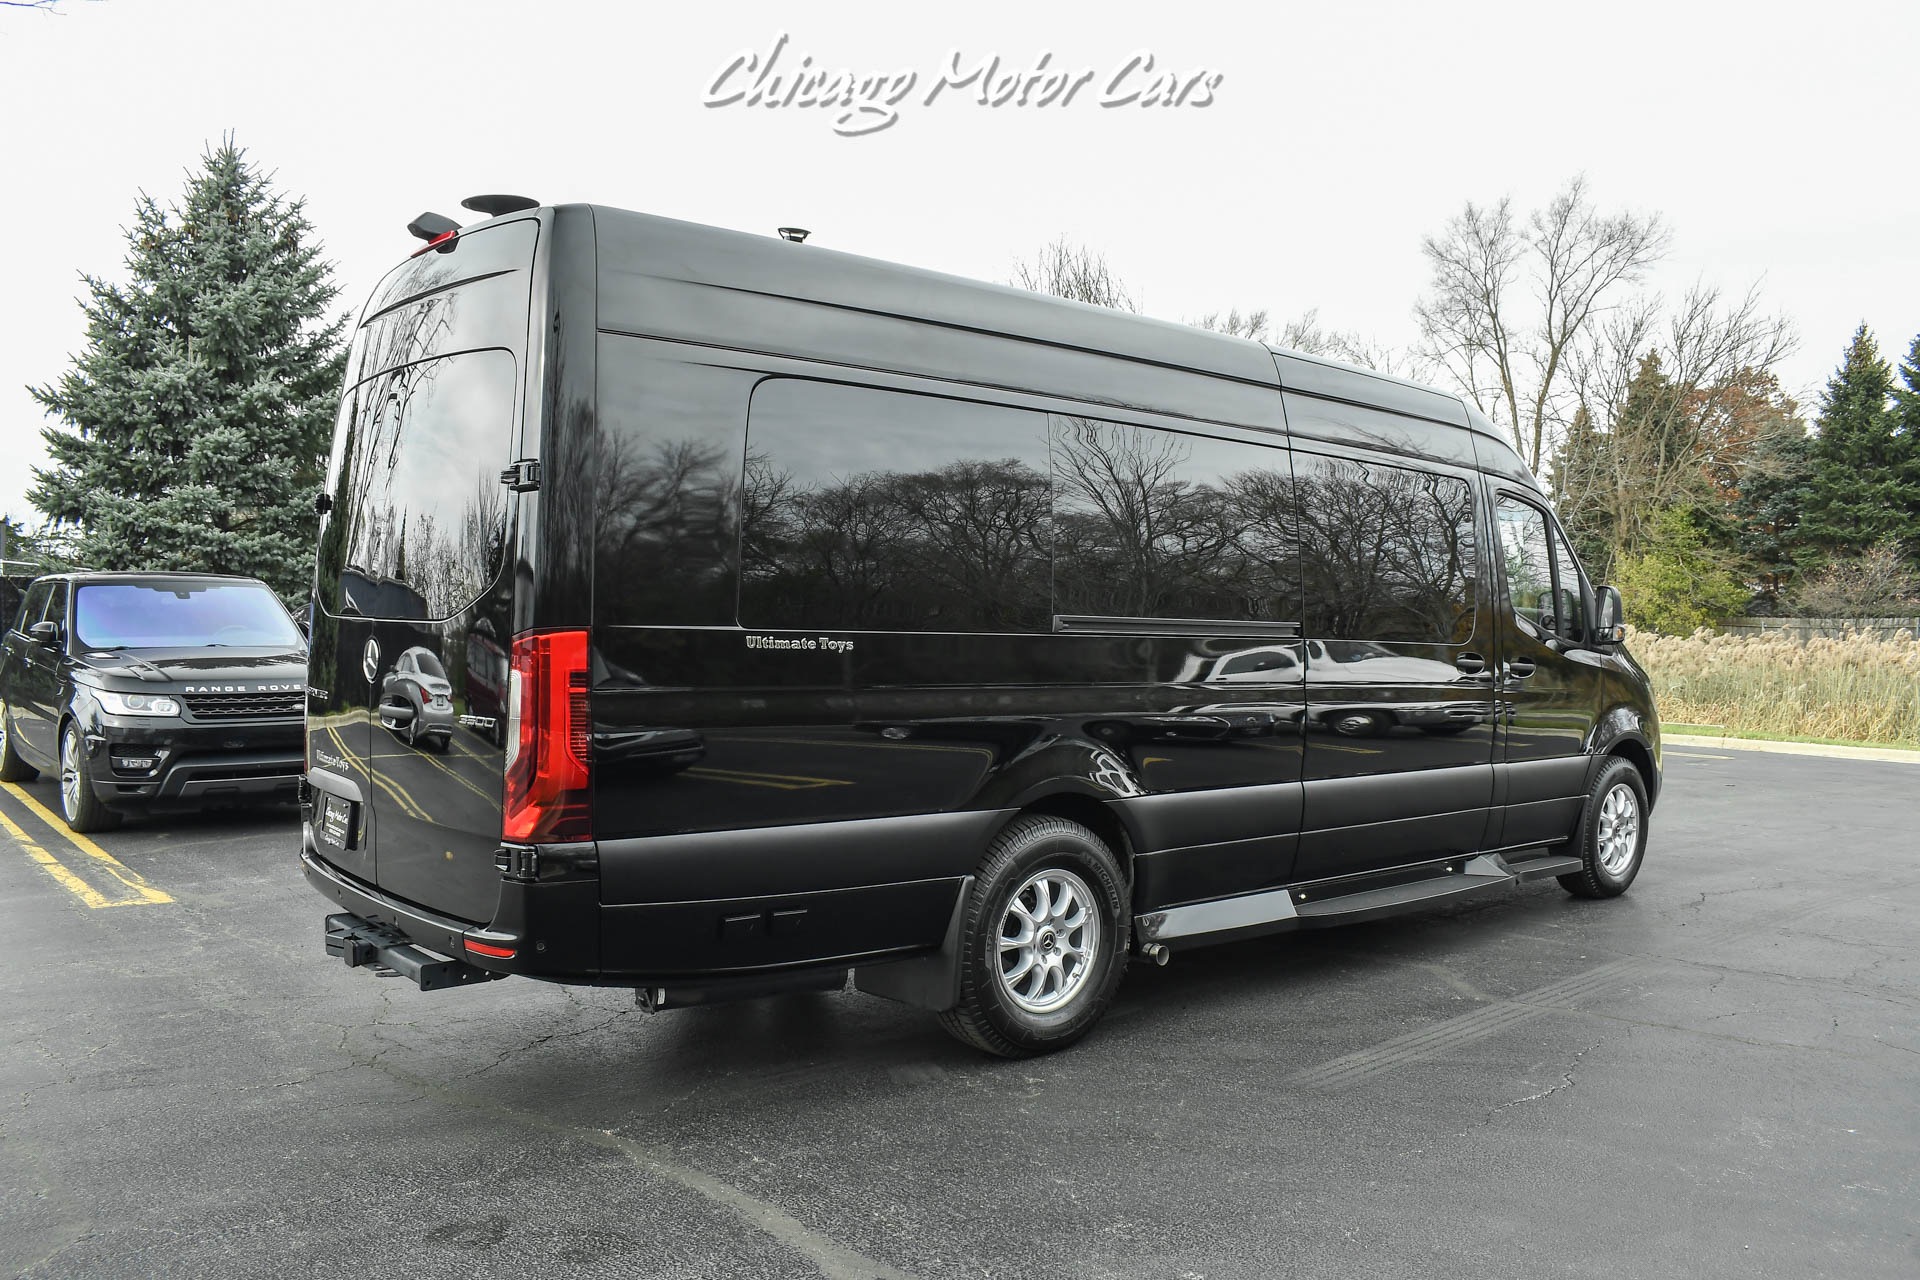 Used-2022-Mercedes-Benz-Sprinter-PRESIDENTIAL-3500-Ultimate-Luxury-SEATS-UP-TO-10-BATHROOM-TWO-HD-TVS-REFRIGERATOR